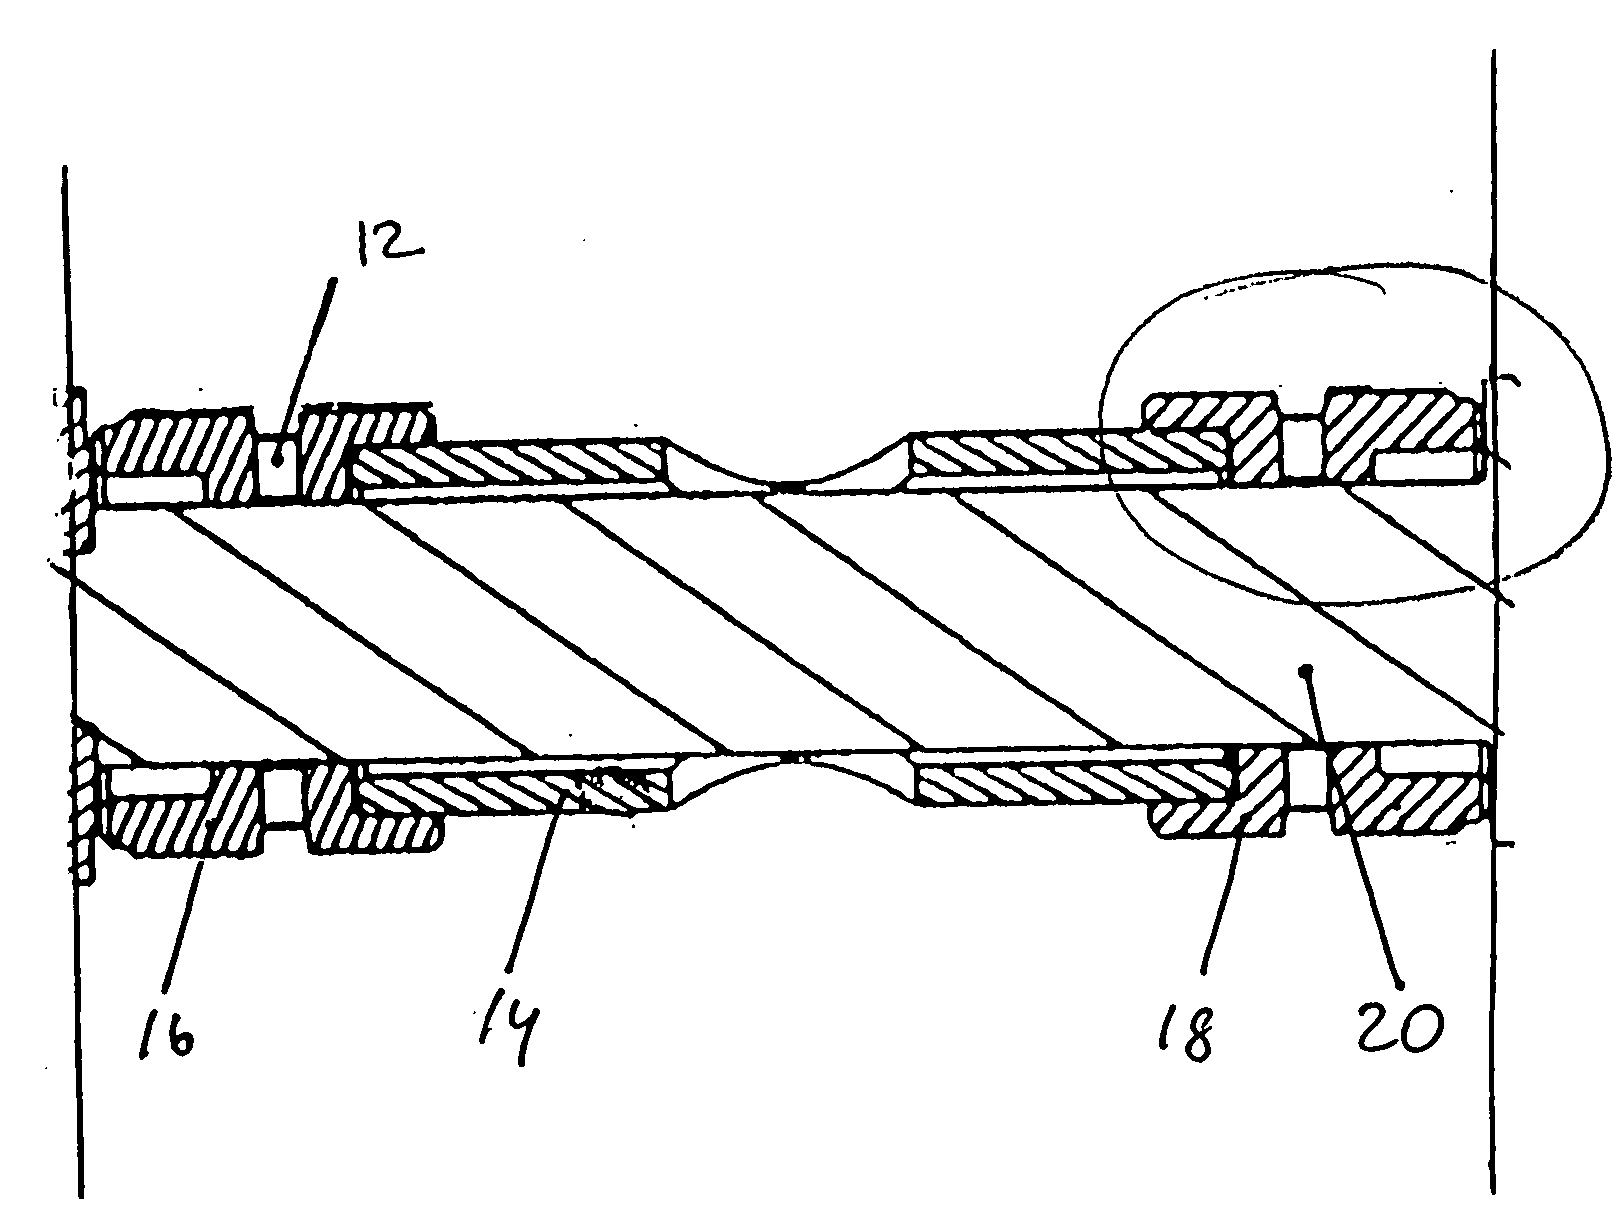 Bearing system for a turbocharger